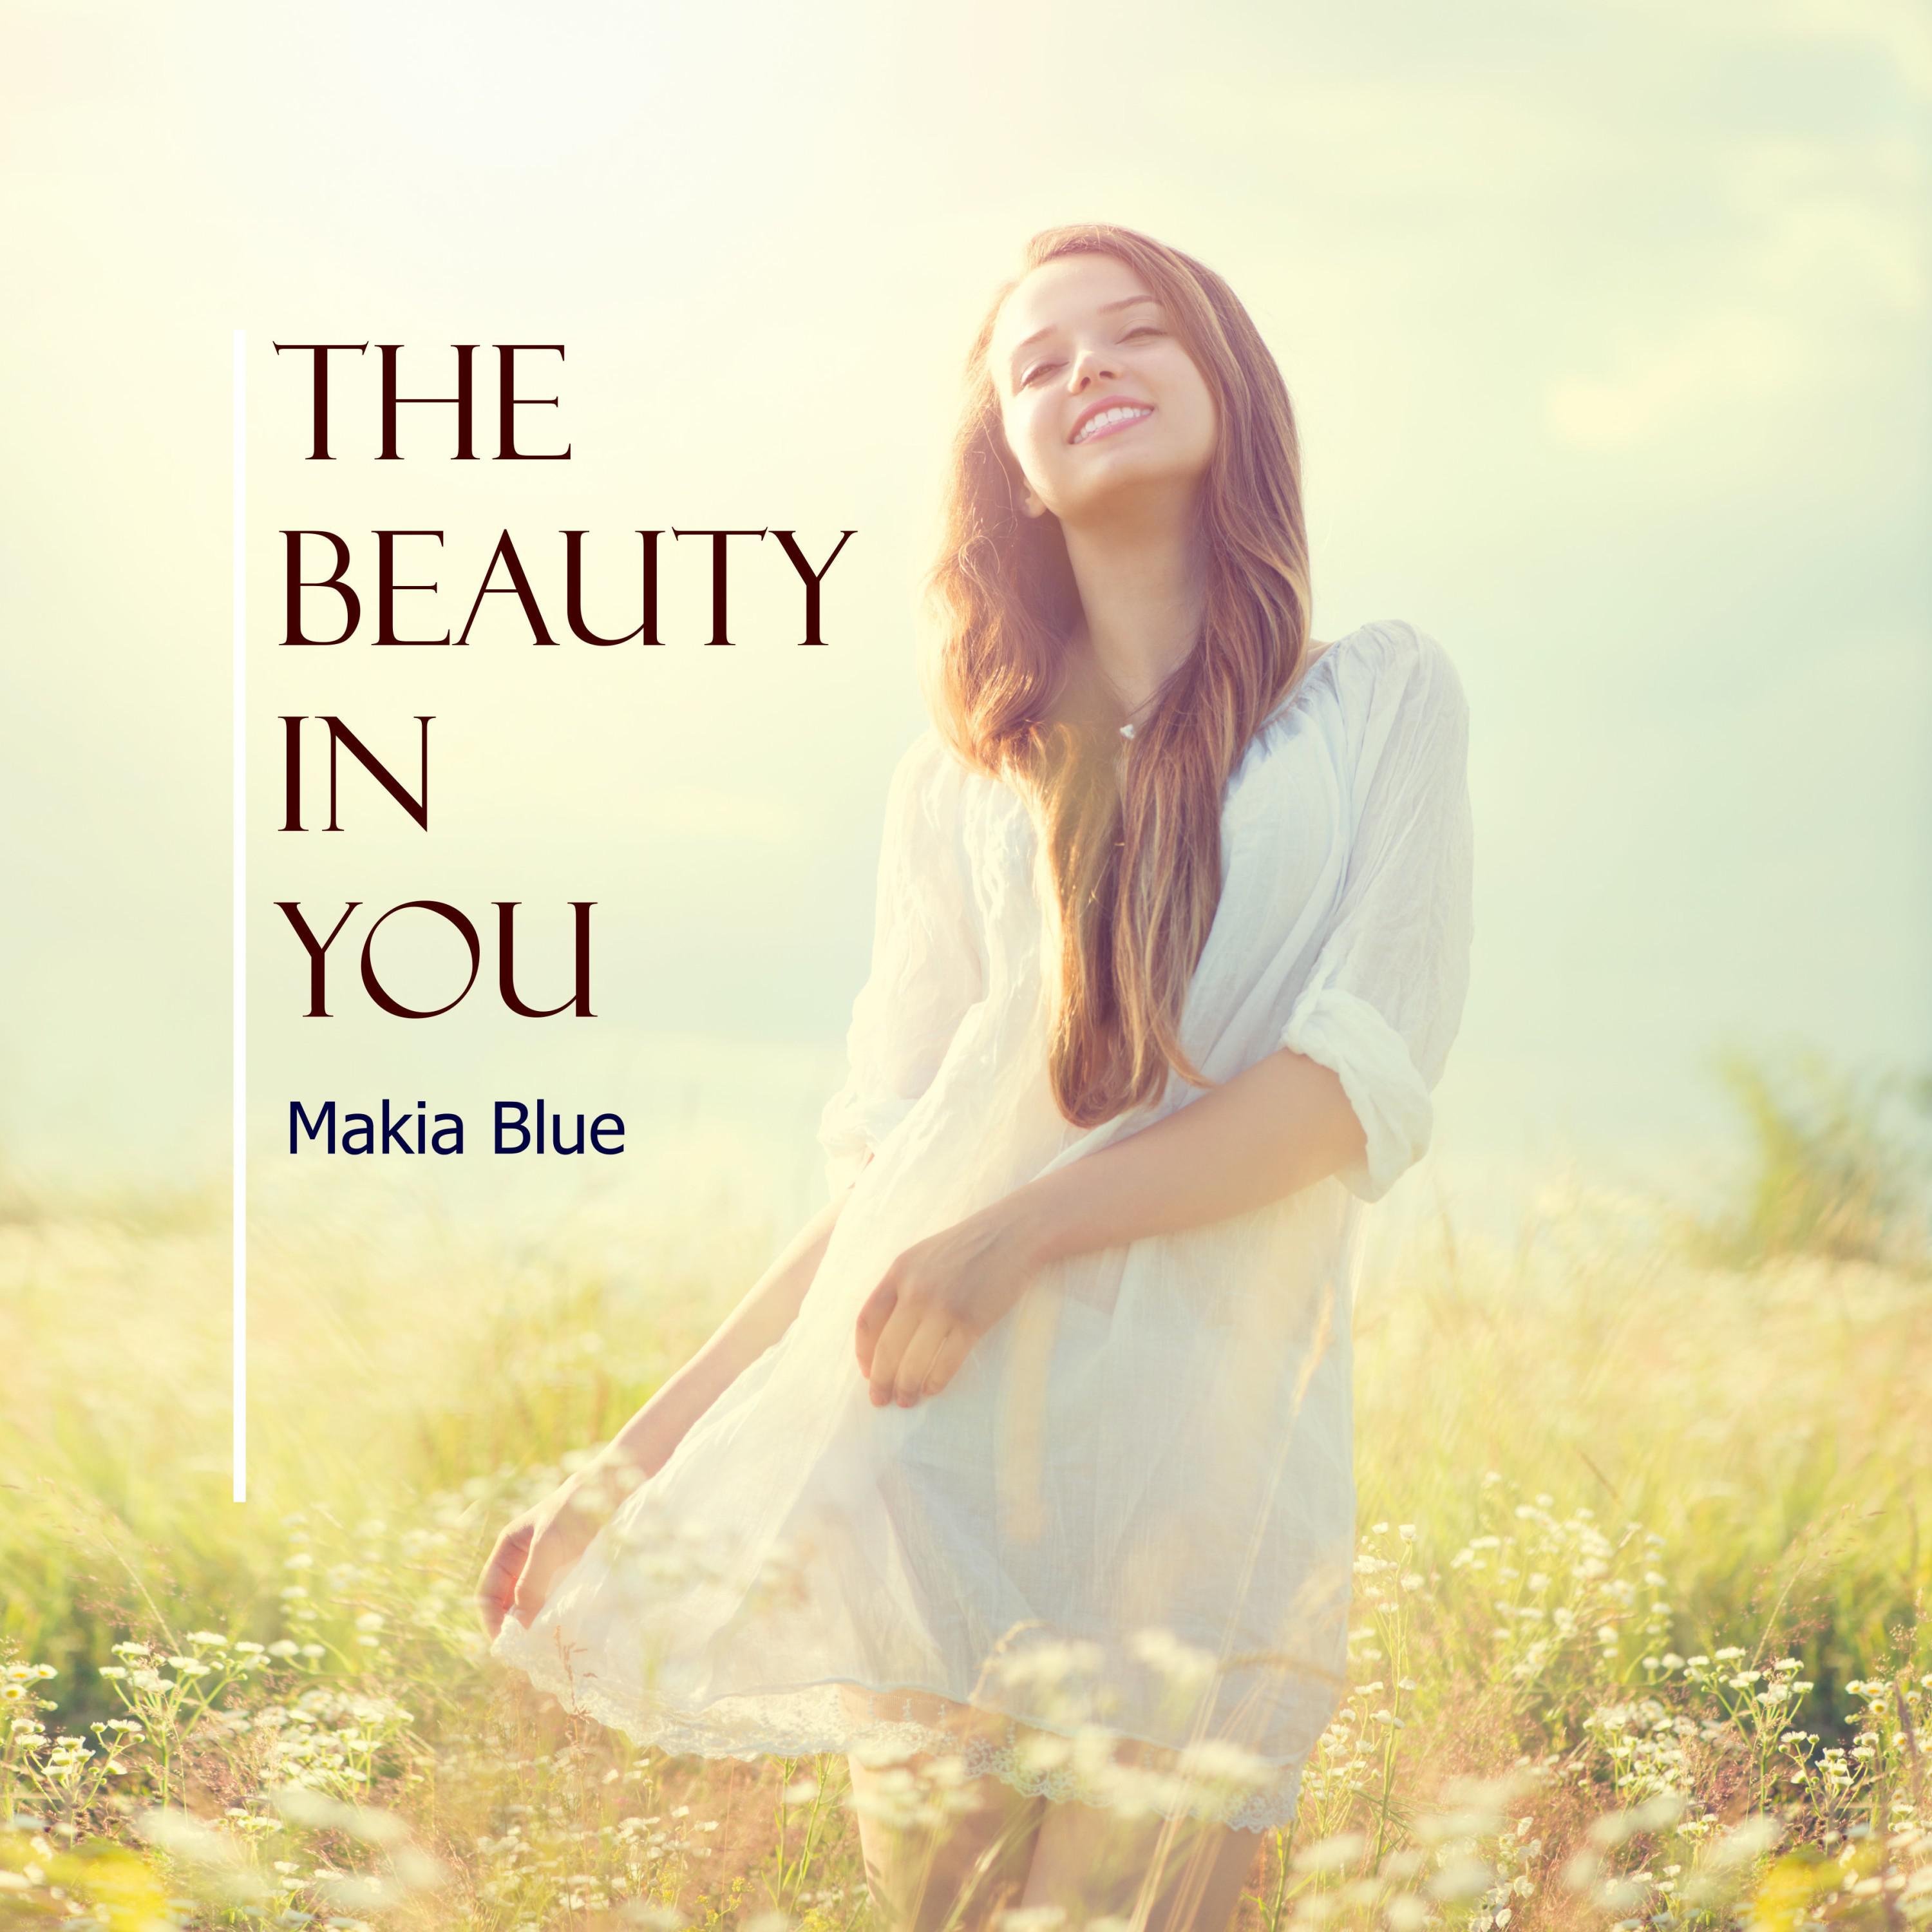 We are beautiful ones. Картинка со словами Beauty in you. Плакат девушка лето. Beauty is you. The way back wys Sweet Medicine.